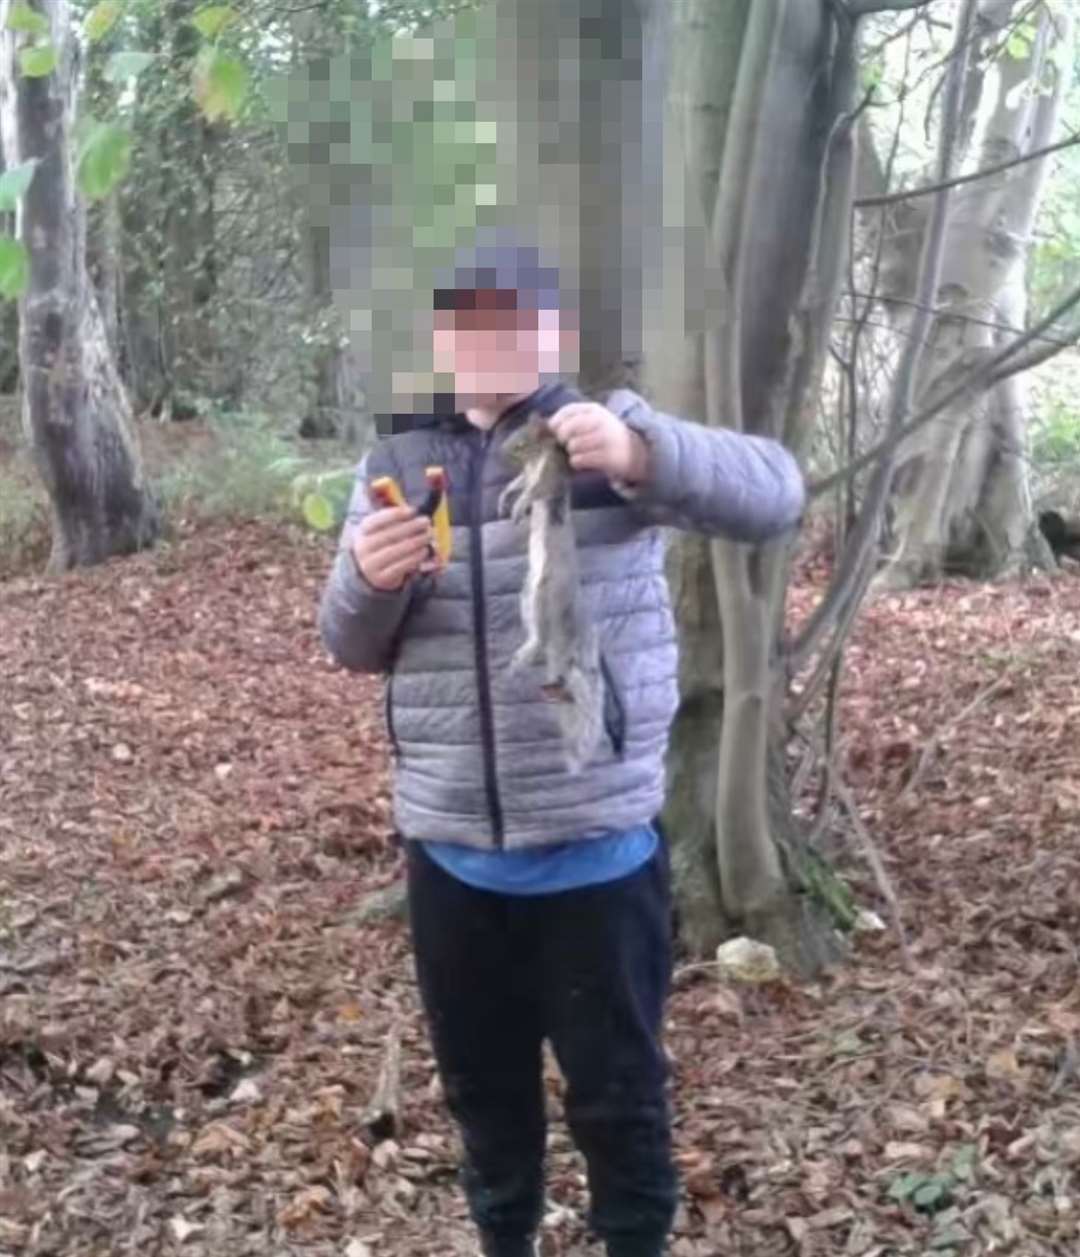 A young boy holding a catapult in one hand and a dead squirrel in the other, shared on TikTok